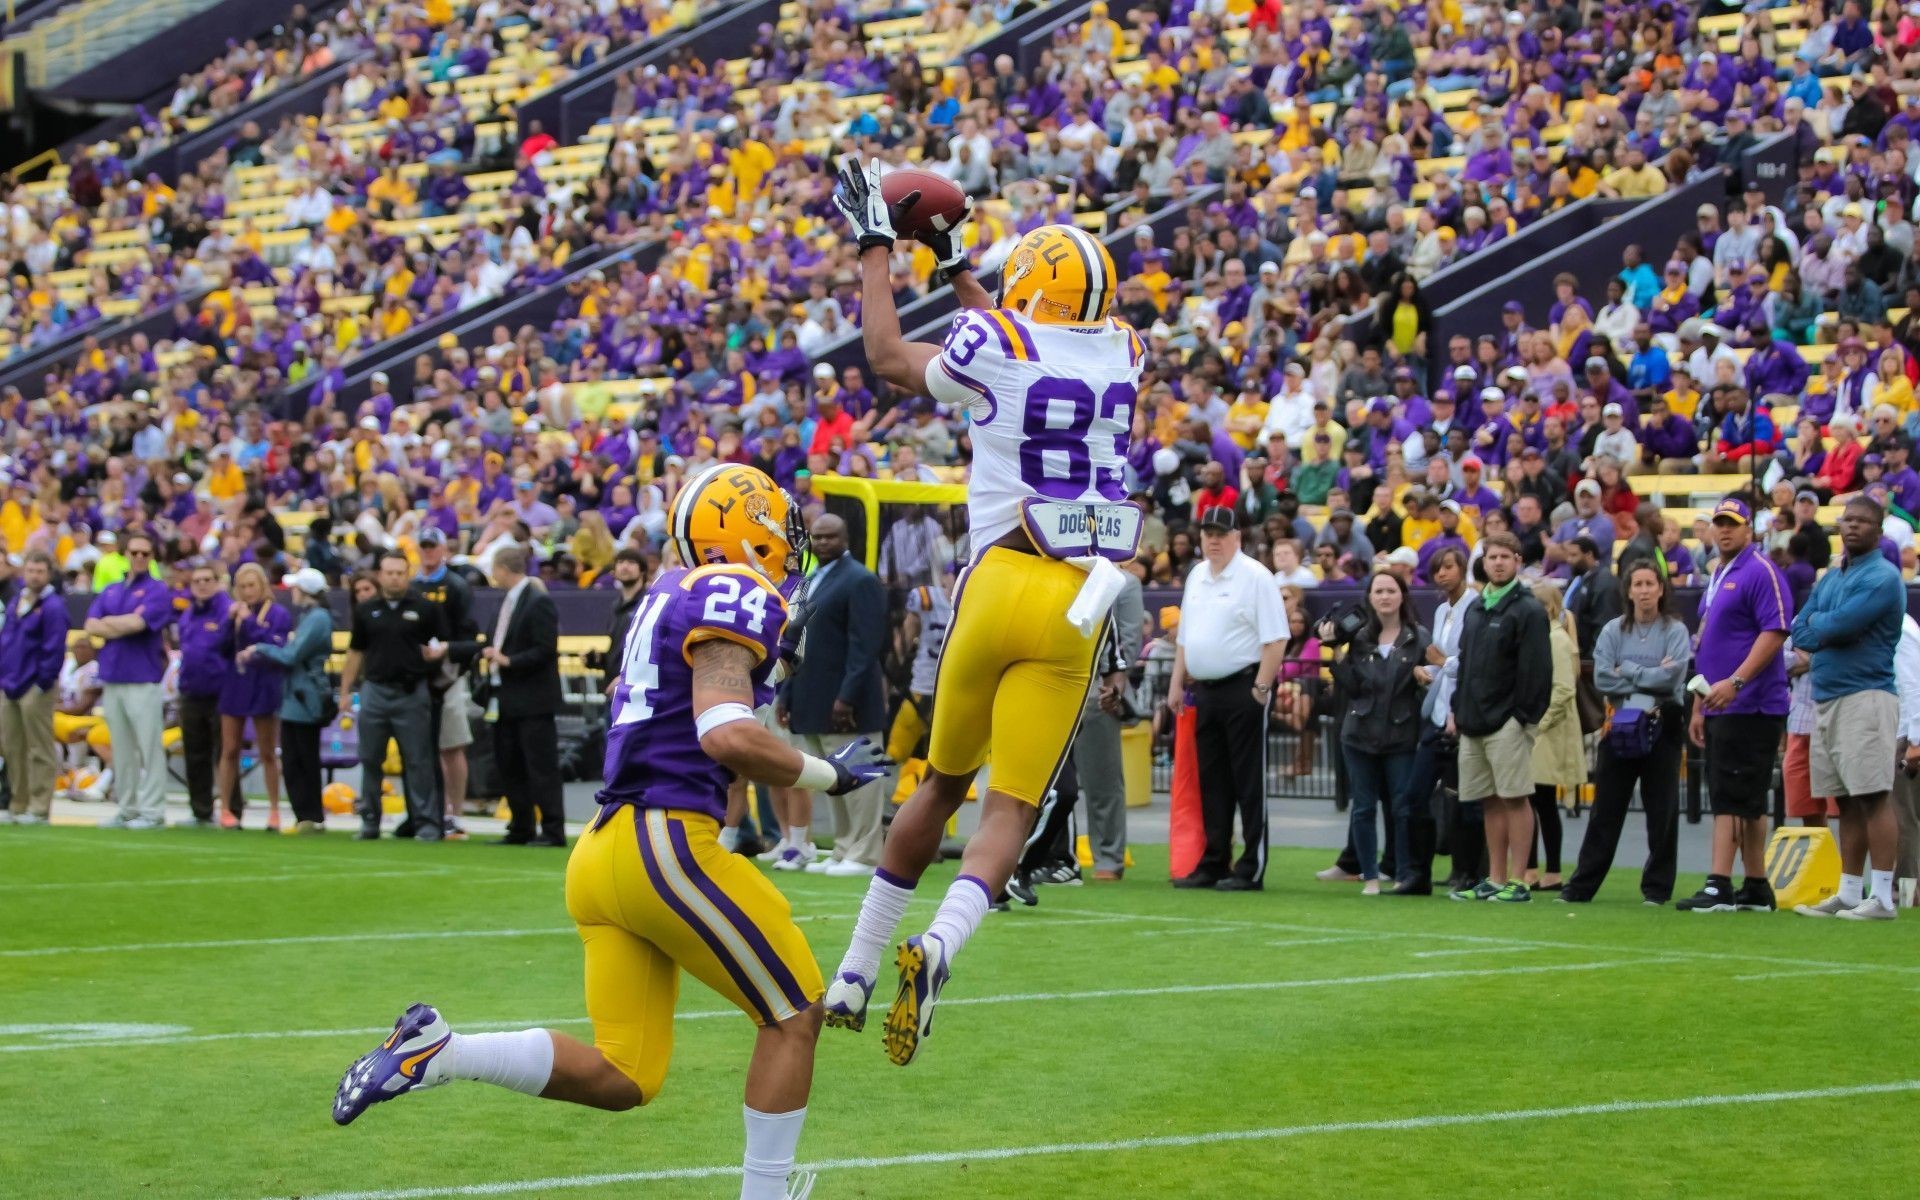 1920x1200 Awesome Lsu Football Wallpaper Free Wallpaper For Desktop and Mobile in All  Resolutions Free Download nature